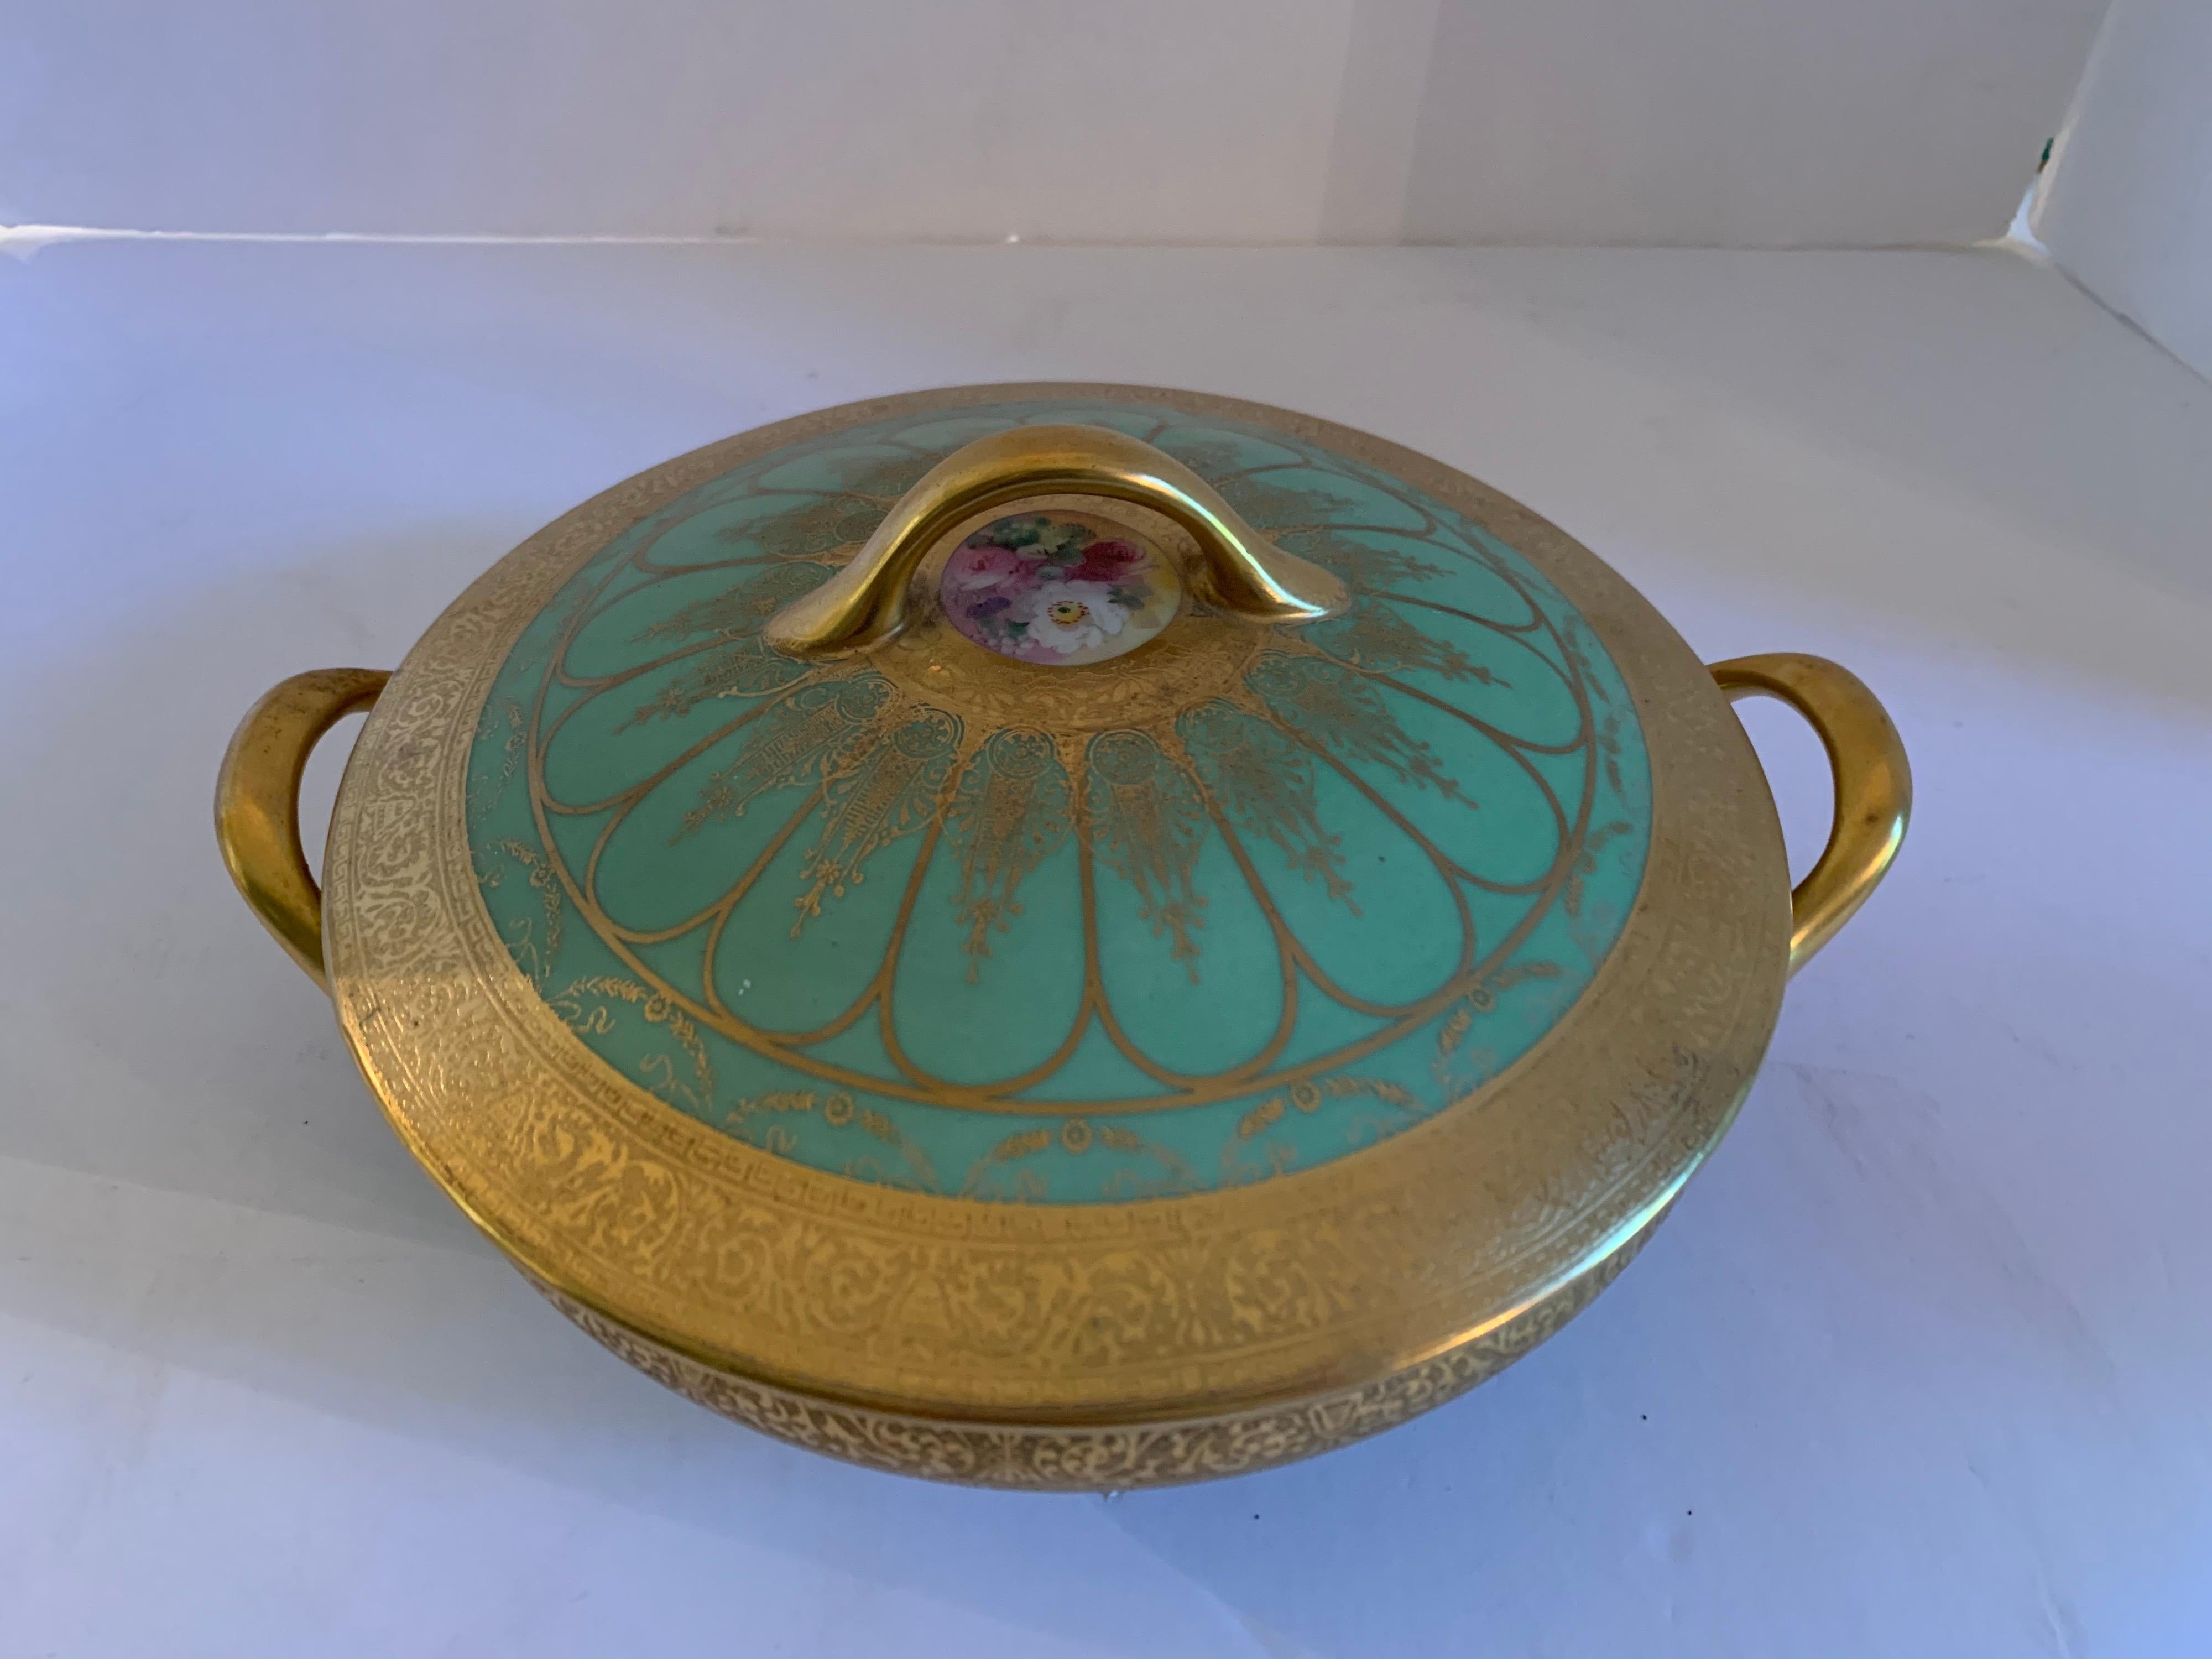 Rare signed Limoges green and gold fine porcelain piece. Ultra-rare style. One of several
pieces we will be selling on 1stDibs this week exclusively. Now, more than ever, home is where the heart is.